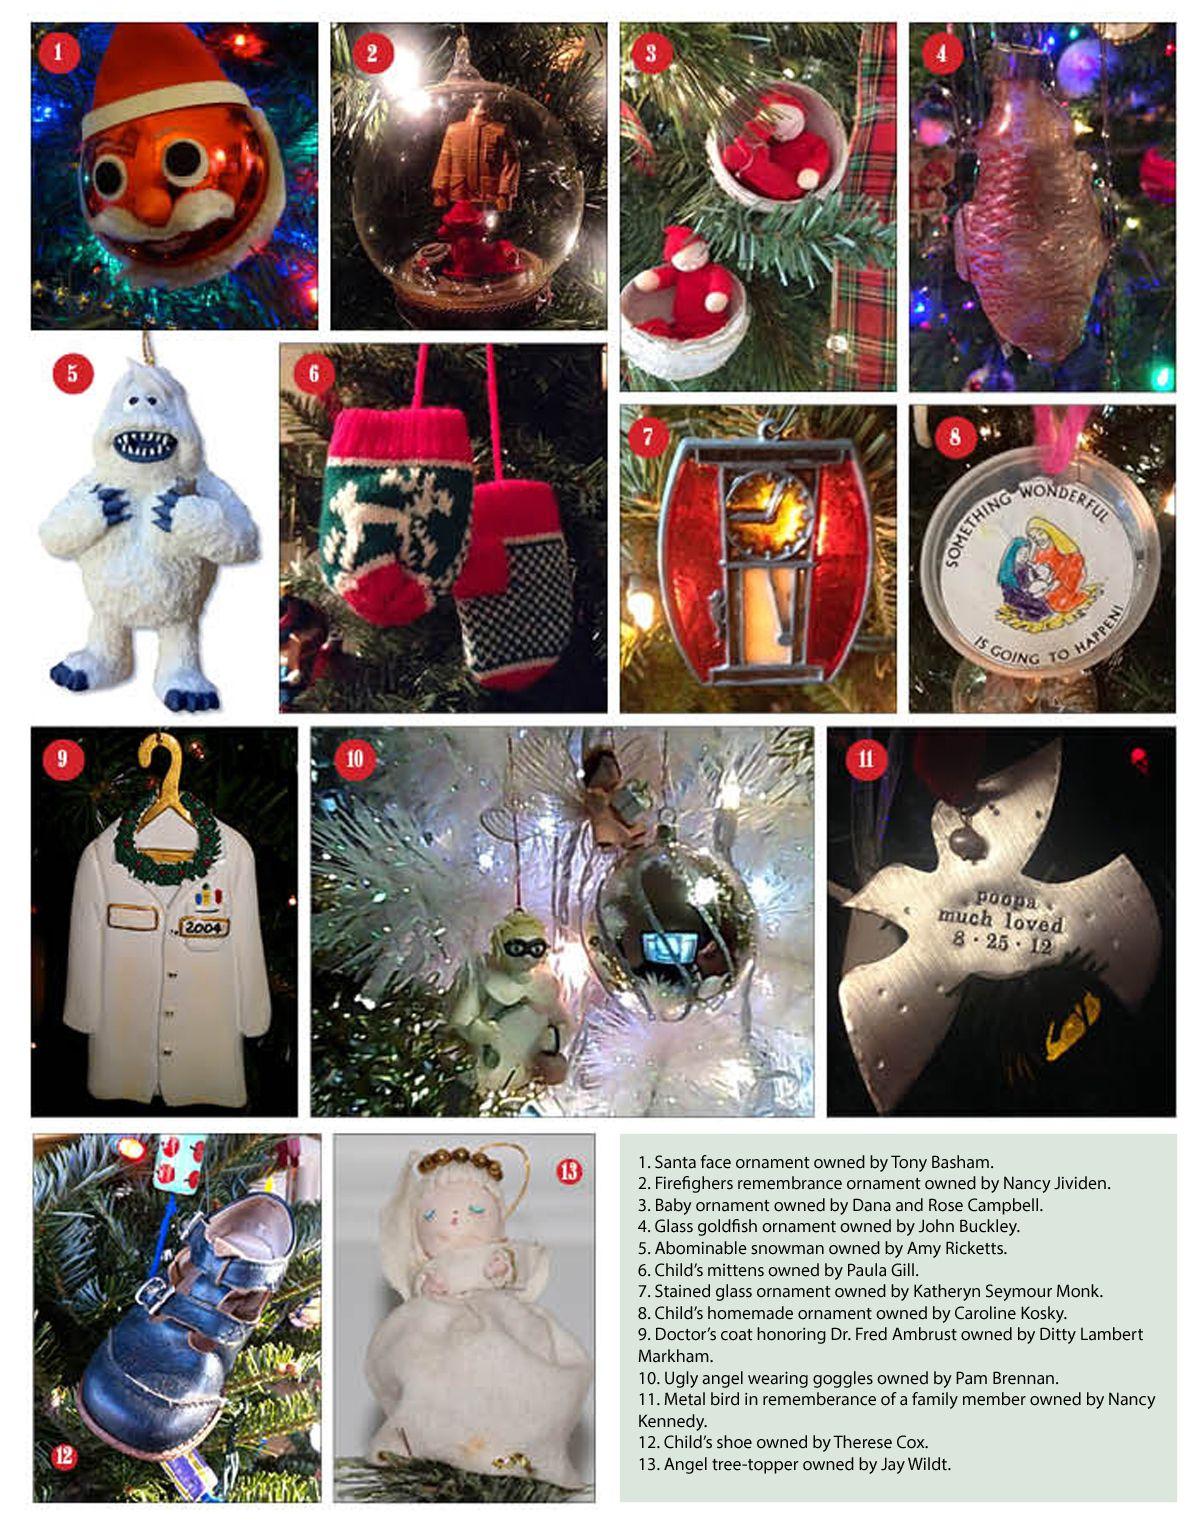 Readers tell the stories of their favorite ornaments